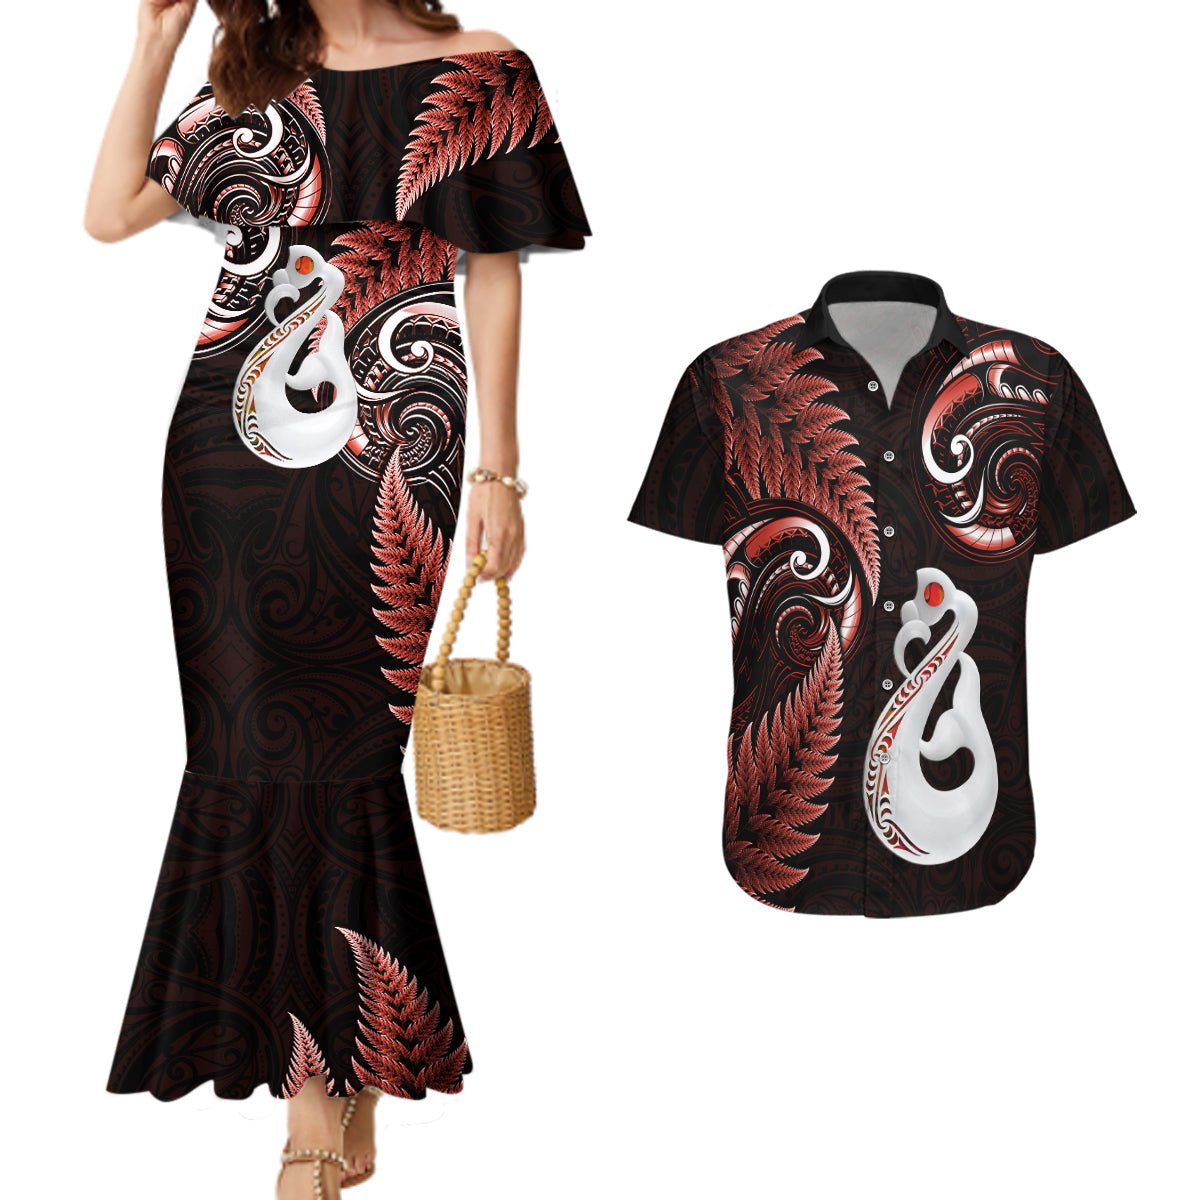 Personalised New Zealand Couples Mermaid Dress And Hawaiian Shirt Aotearoa Silver Fern With Manaia Maori Unique Red LT14 Red - Polynesian Pride